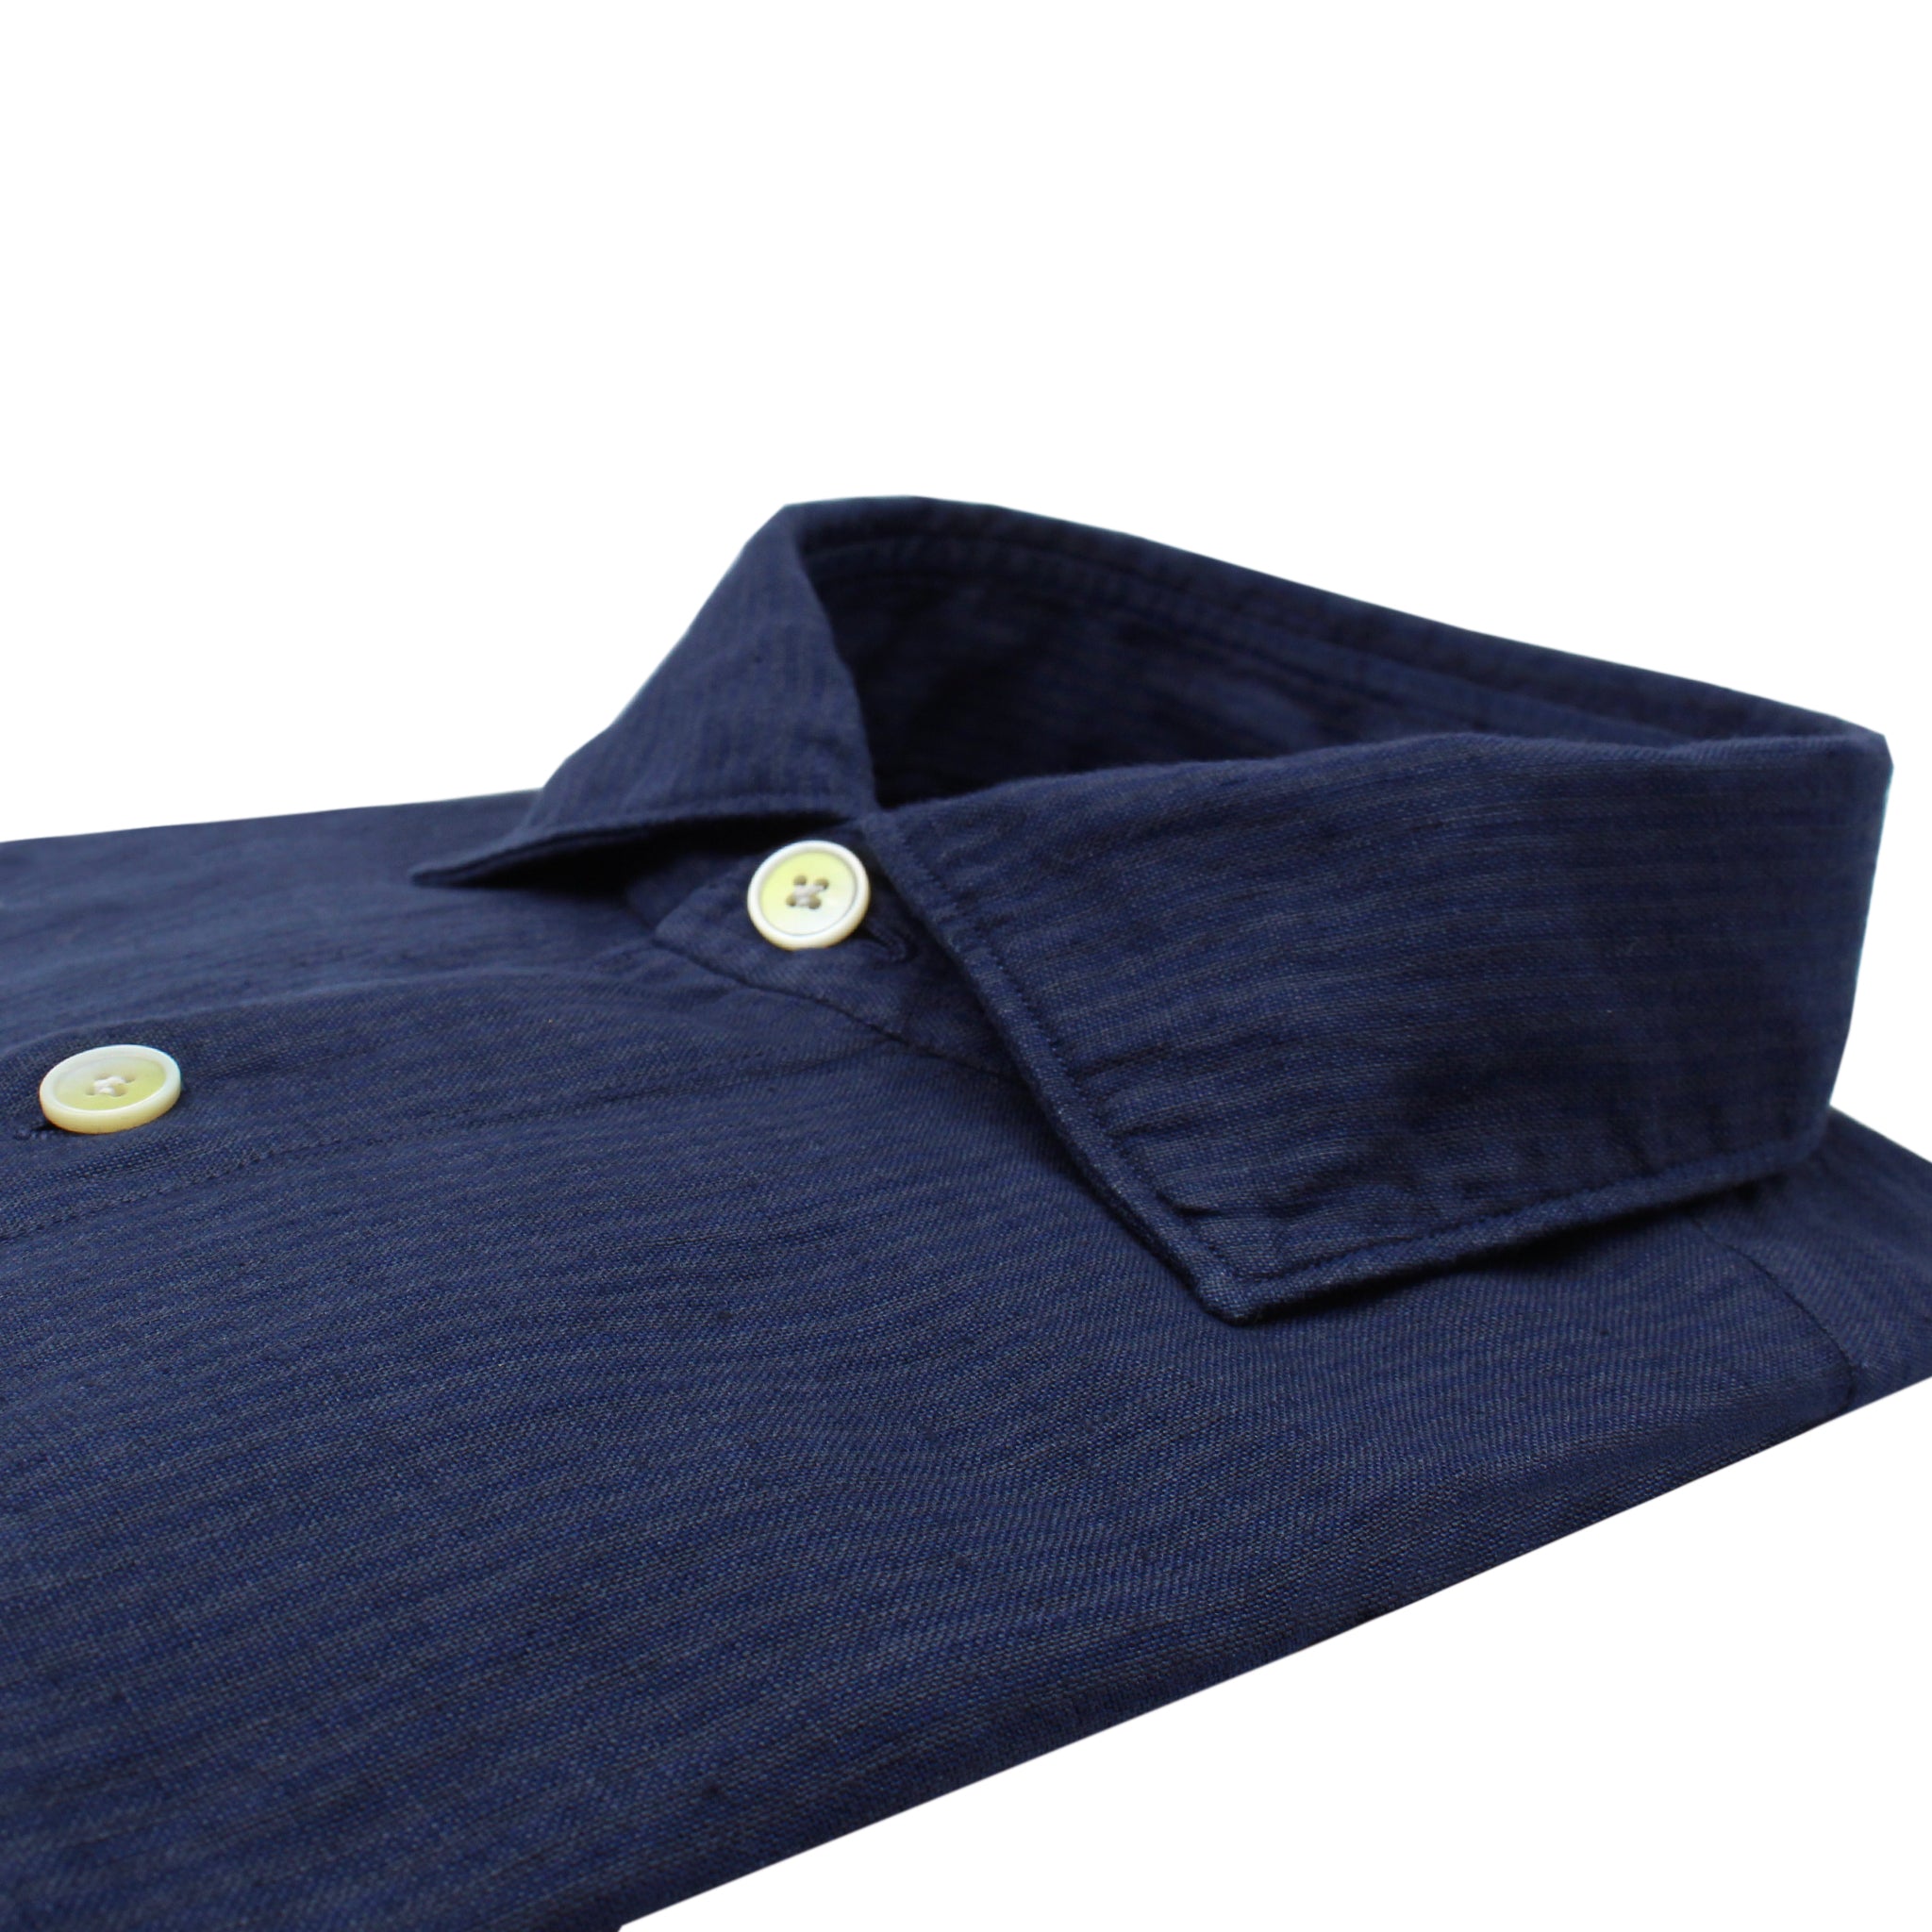 Milano striped slim fit linen shirt with front pocket